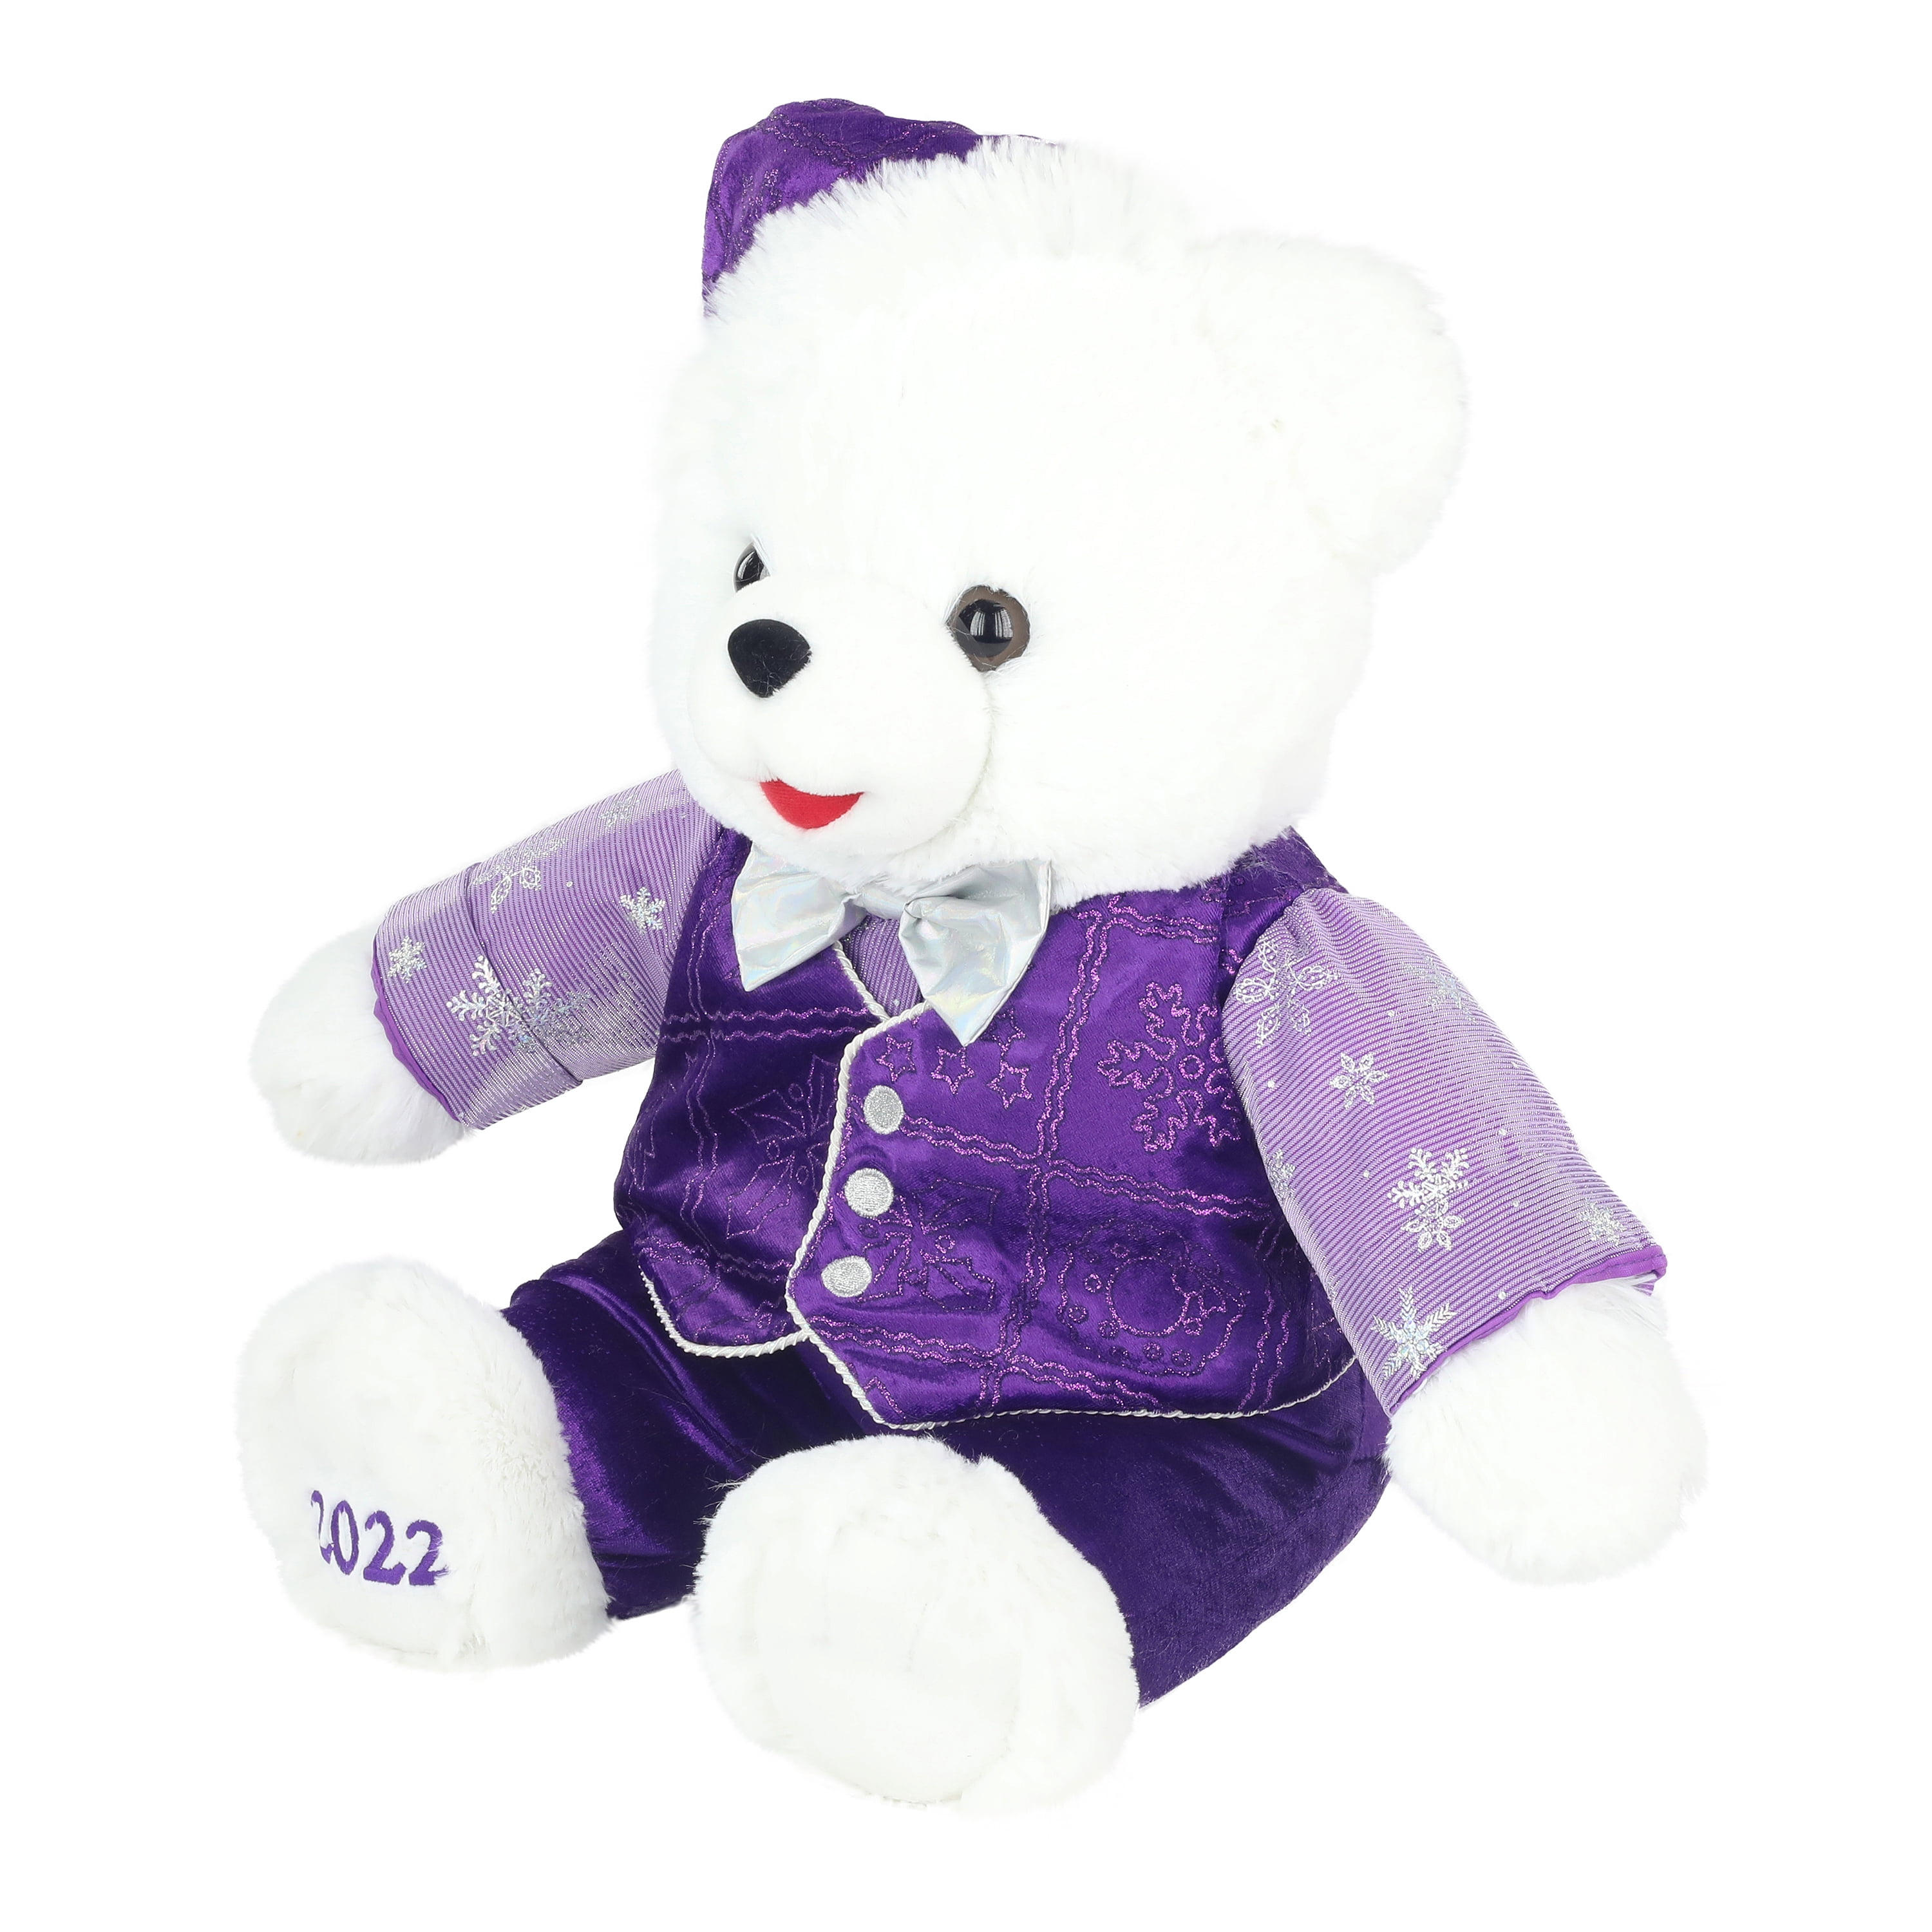 Holiday Time 15 inch Snowflake Teddy Bear 2022, Snowflake Red